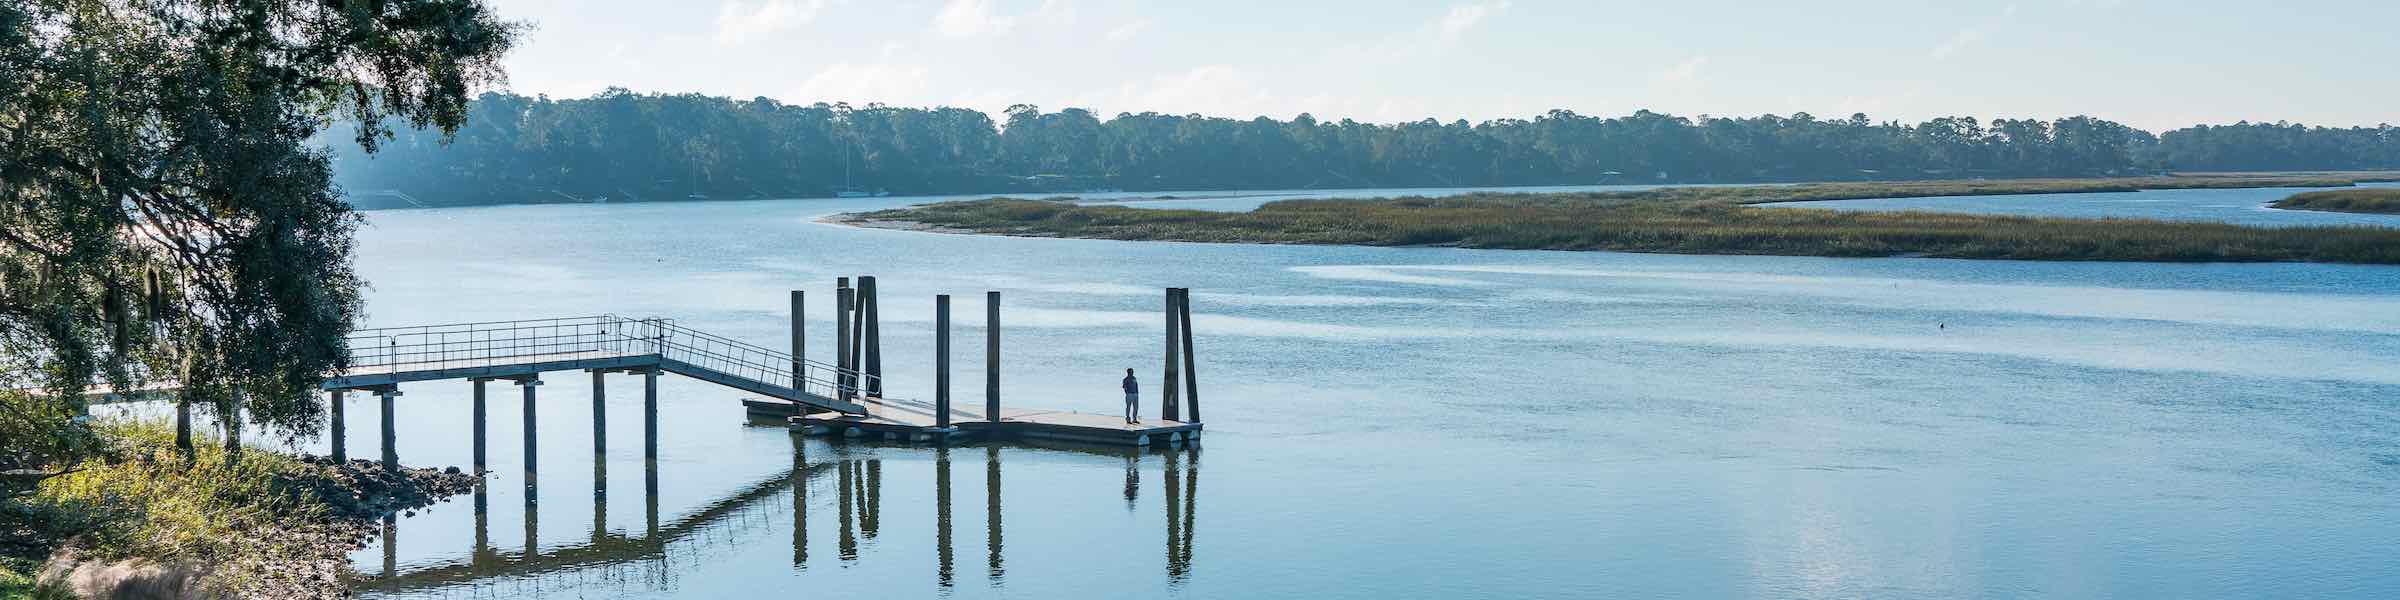 A man standing on a jetty at the May River, Bluffton, SC.